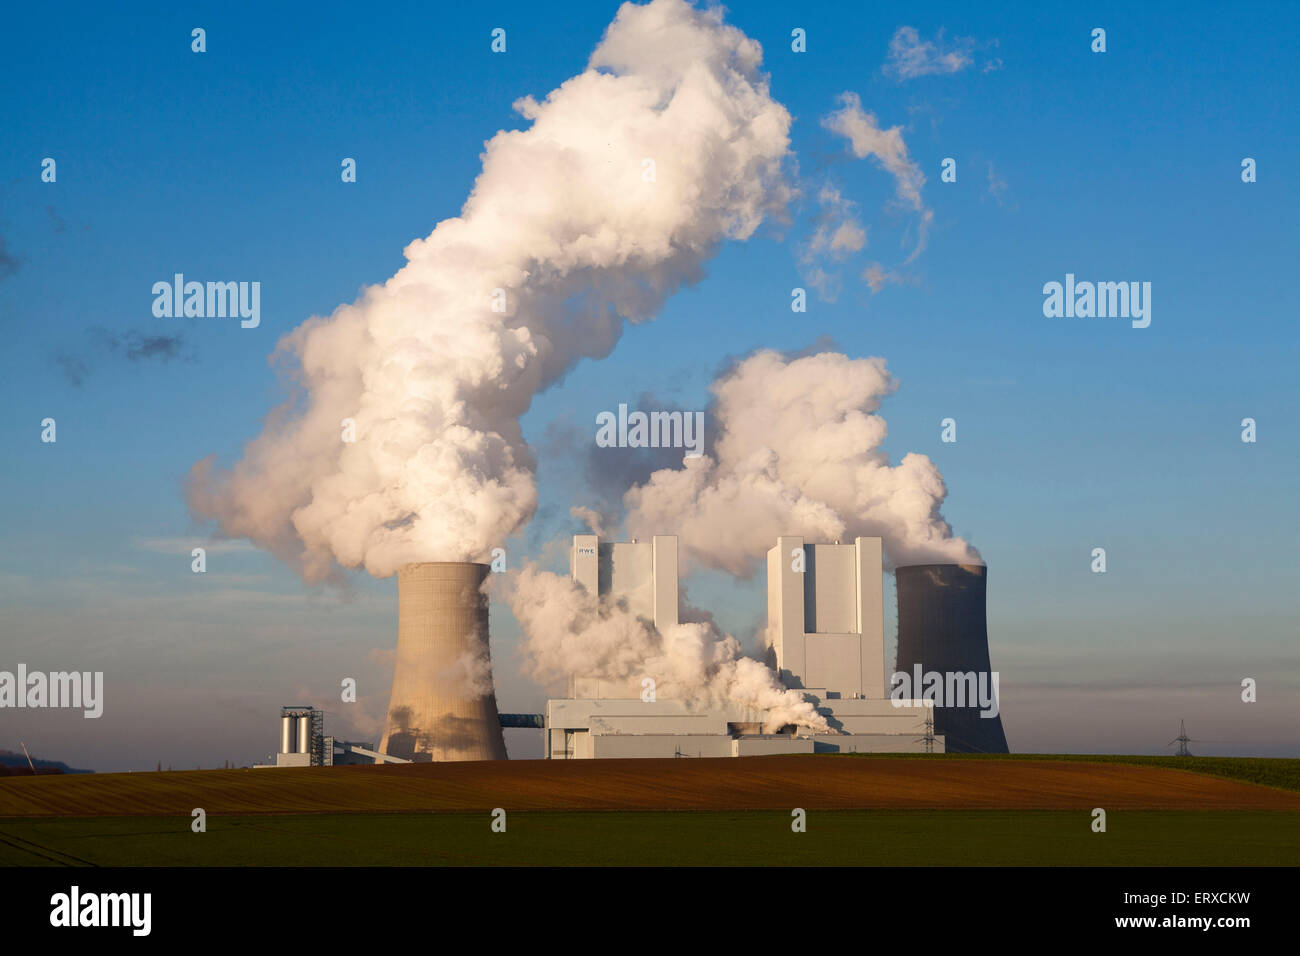 the lignite-fired power plant Neurath in Grevenbroich, Germany. Stock Photo